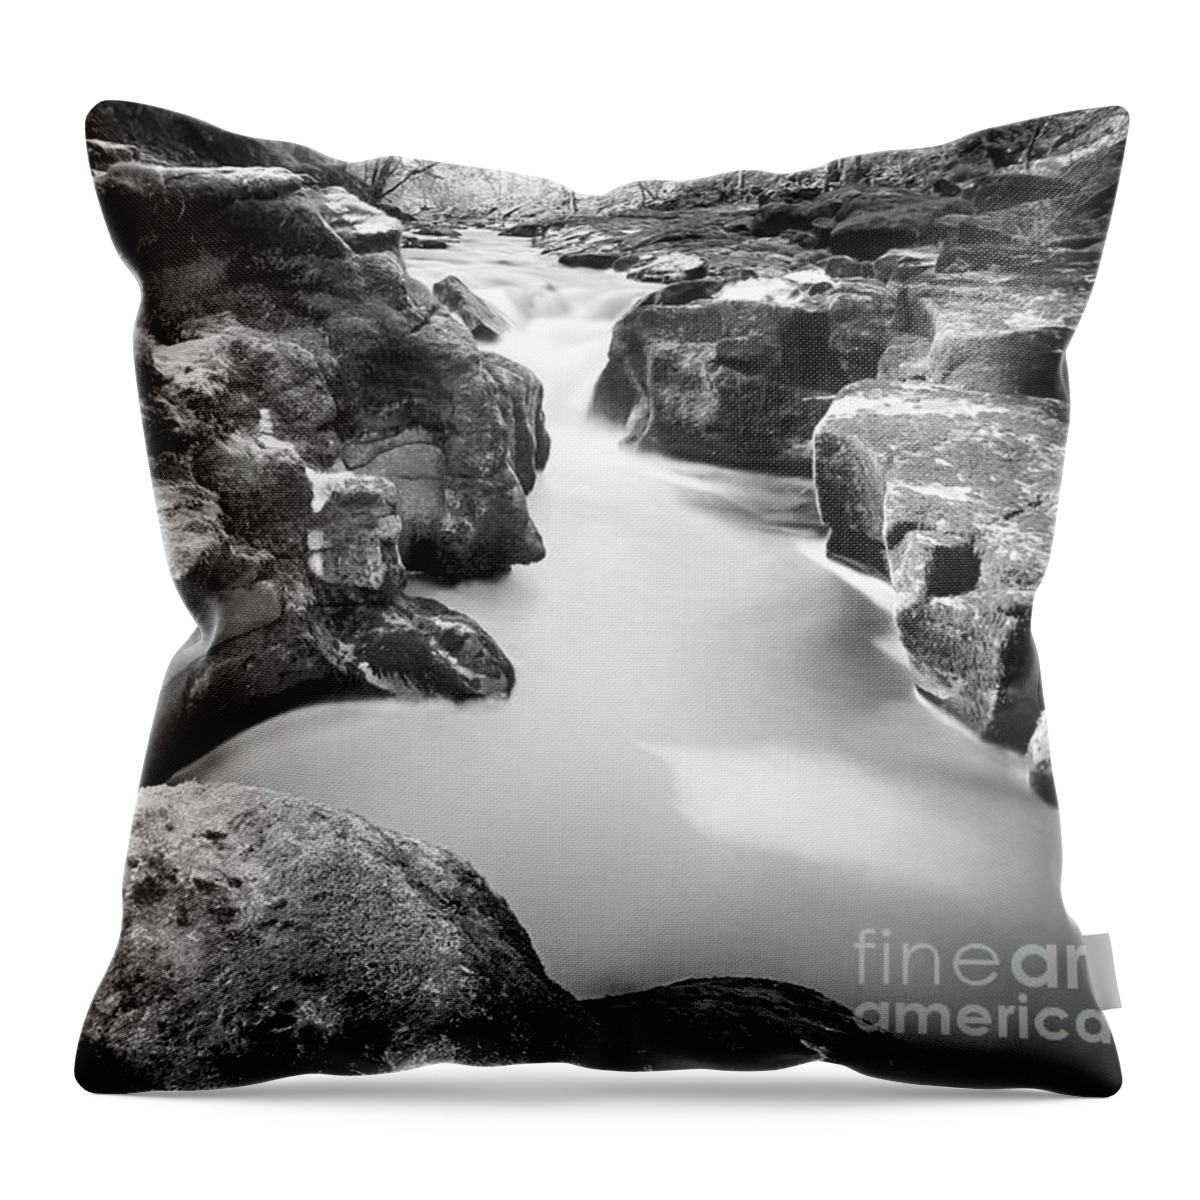 Bolton Abbey Throw Pillow featuring the photograph Waterfall on The River Wharfe #5 by Mariusz Talarek